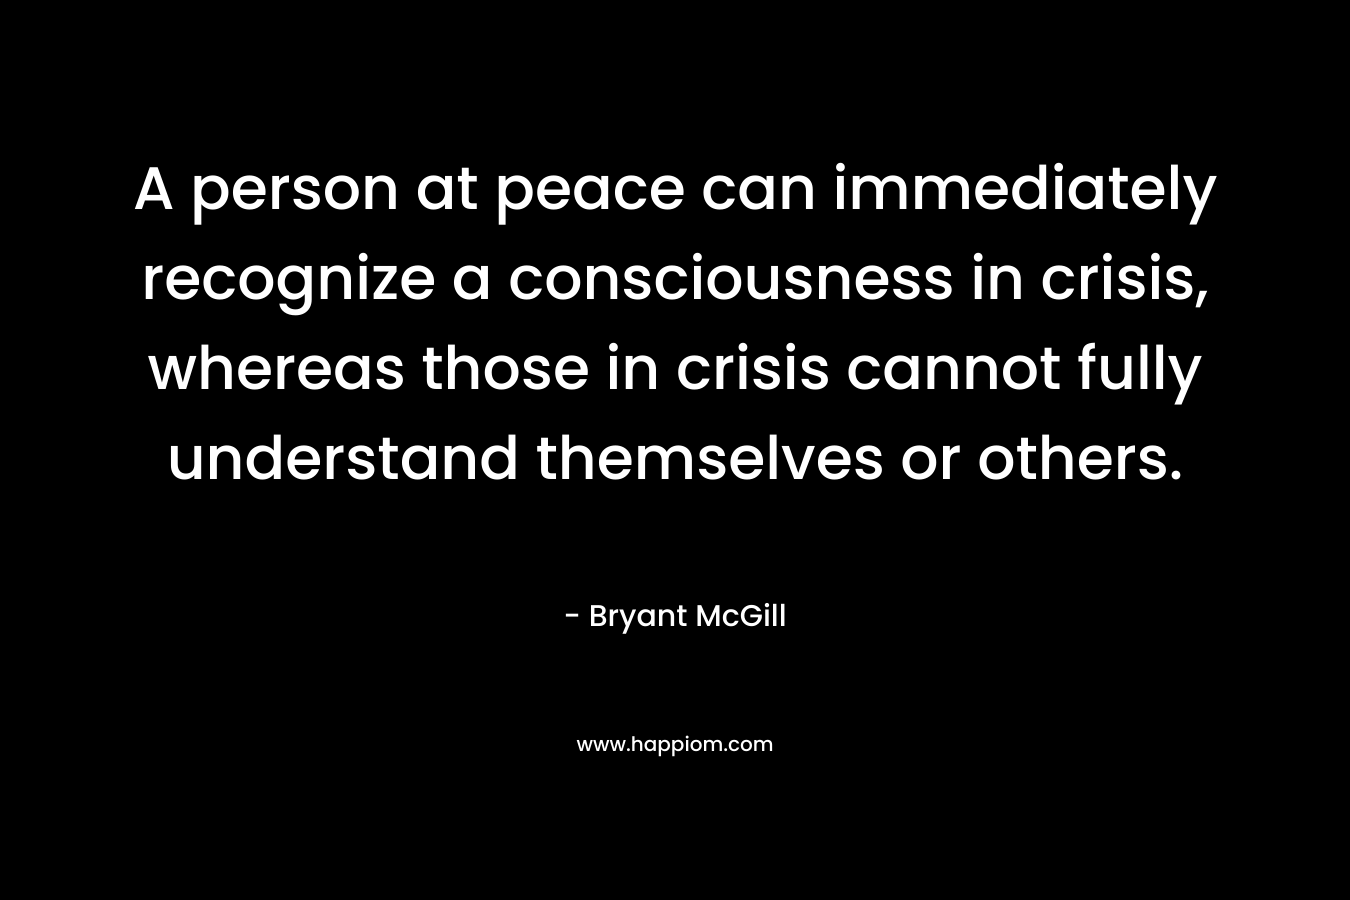 A person at peace can immediately recognize a consciousness in crisis, whereas those in crisis cannot fully understand themselves or others.